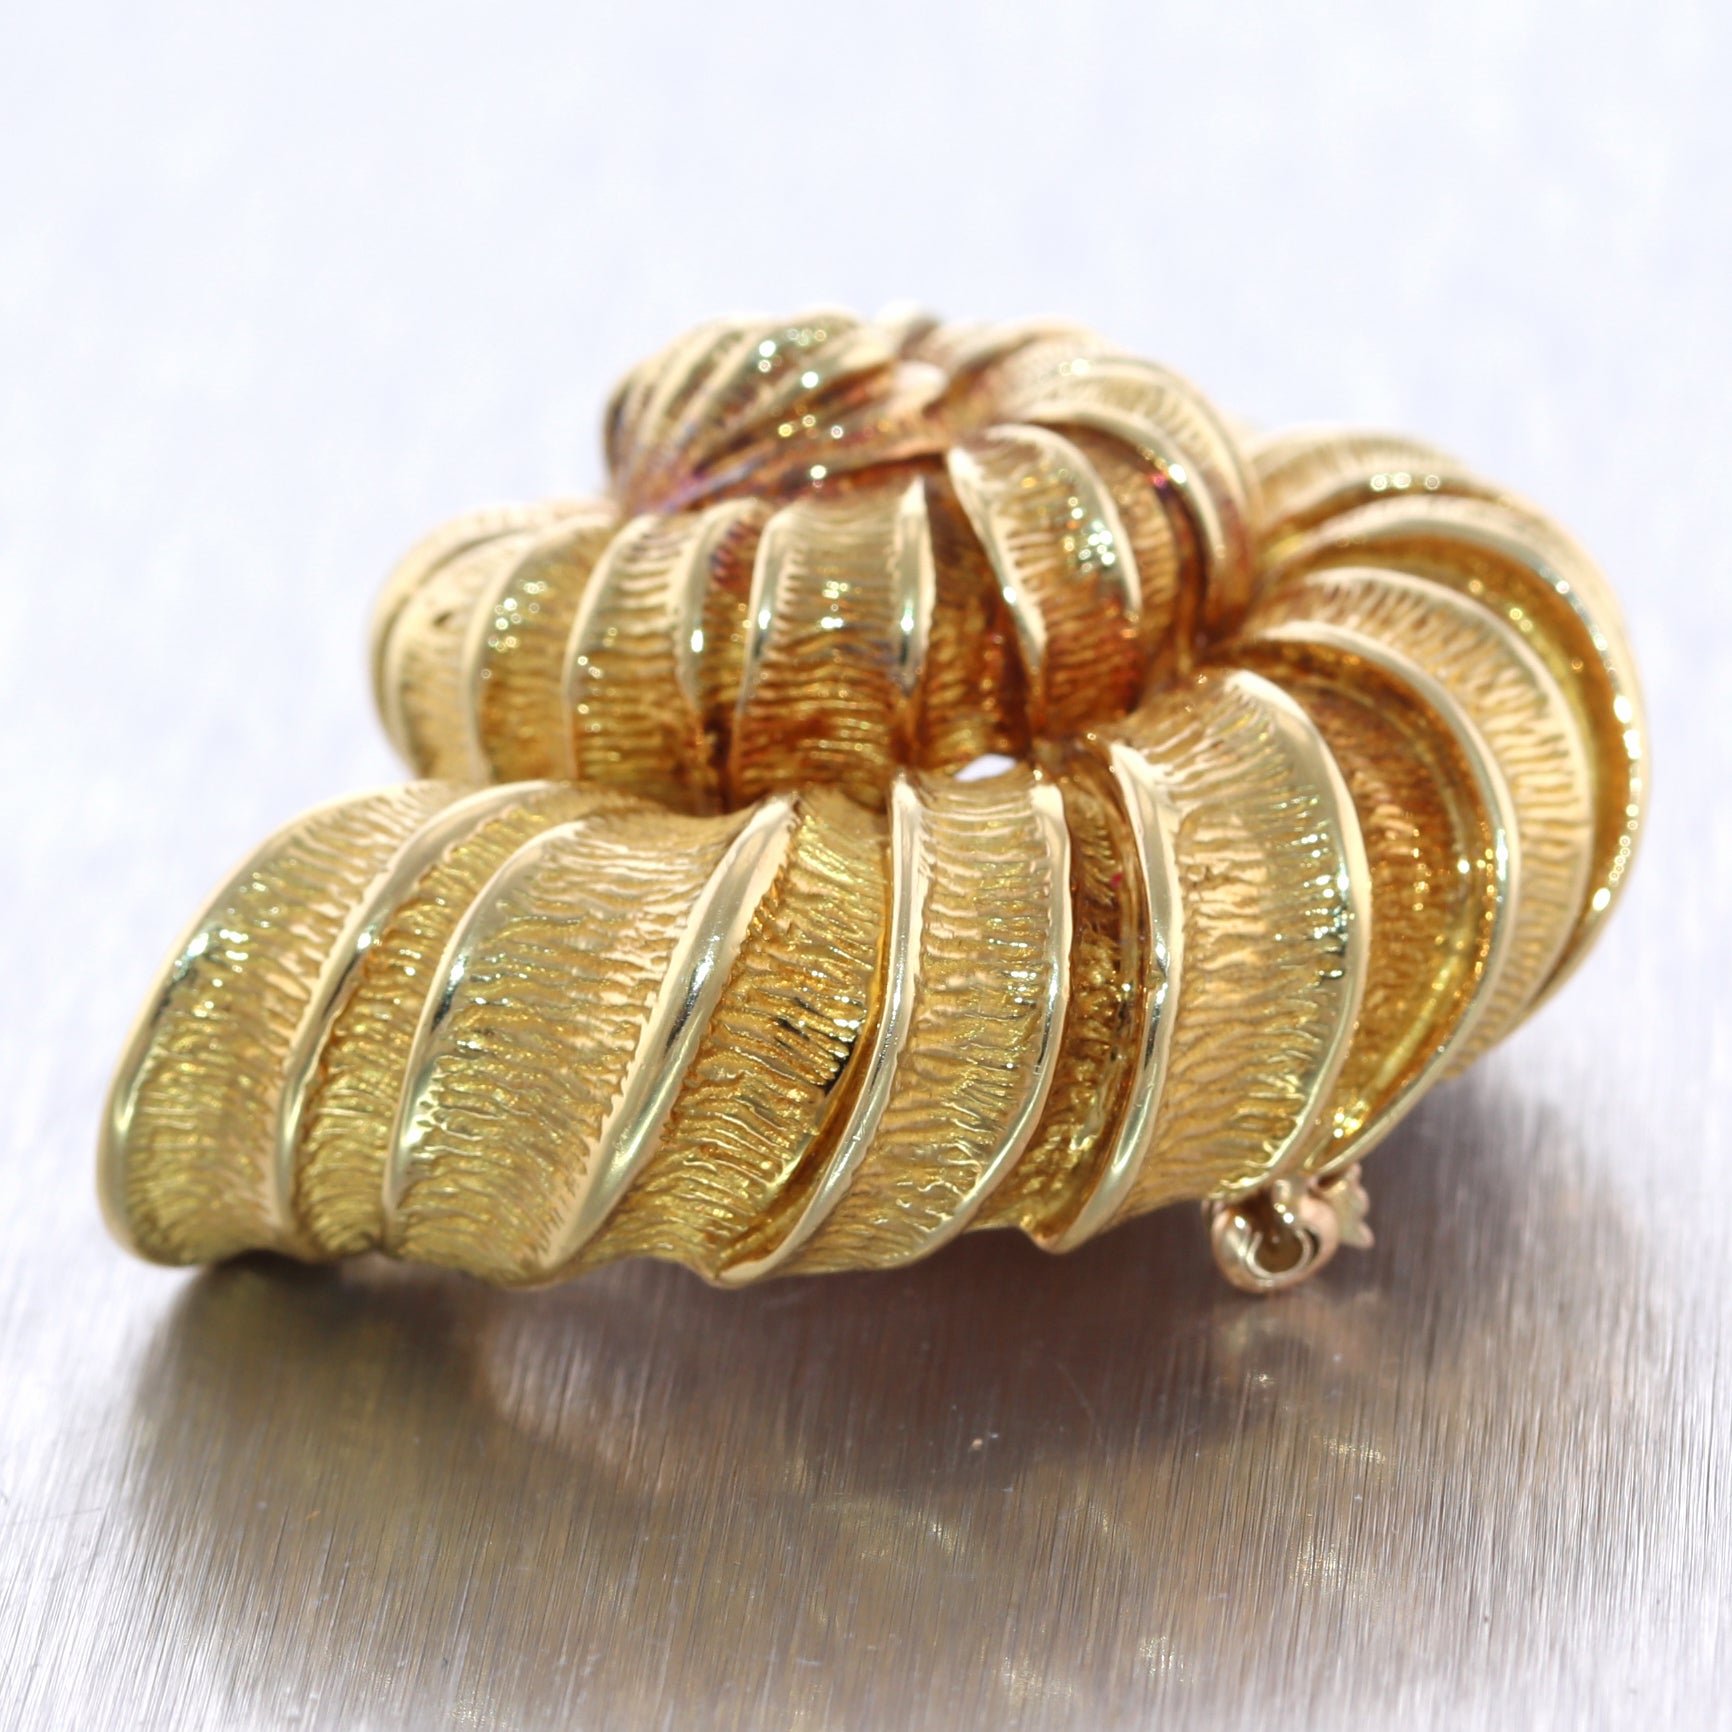 Vintage Estate Tiffany & Co. 18k Yellow Gold Spiral Shell Brooch Pin